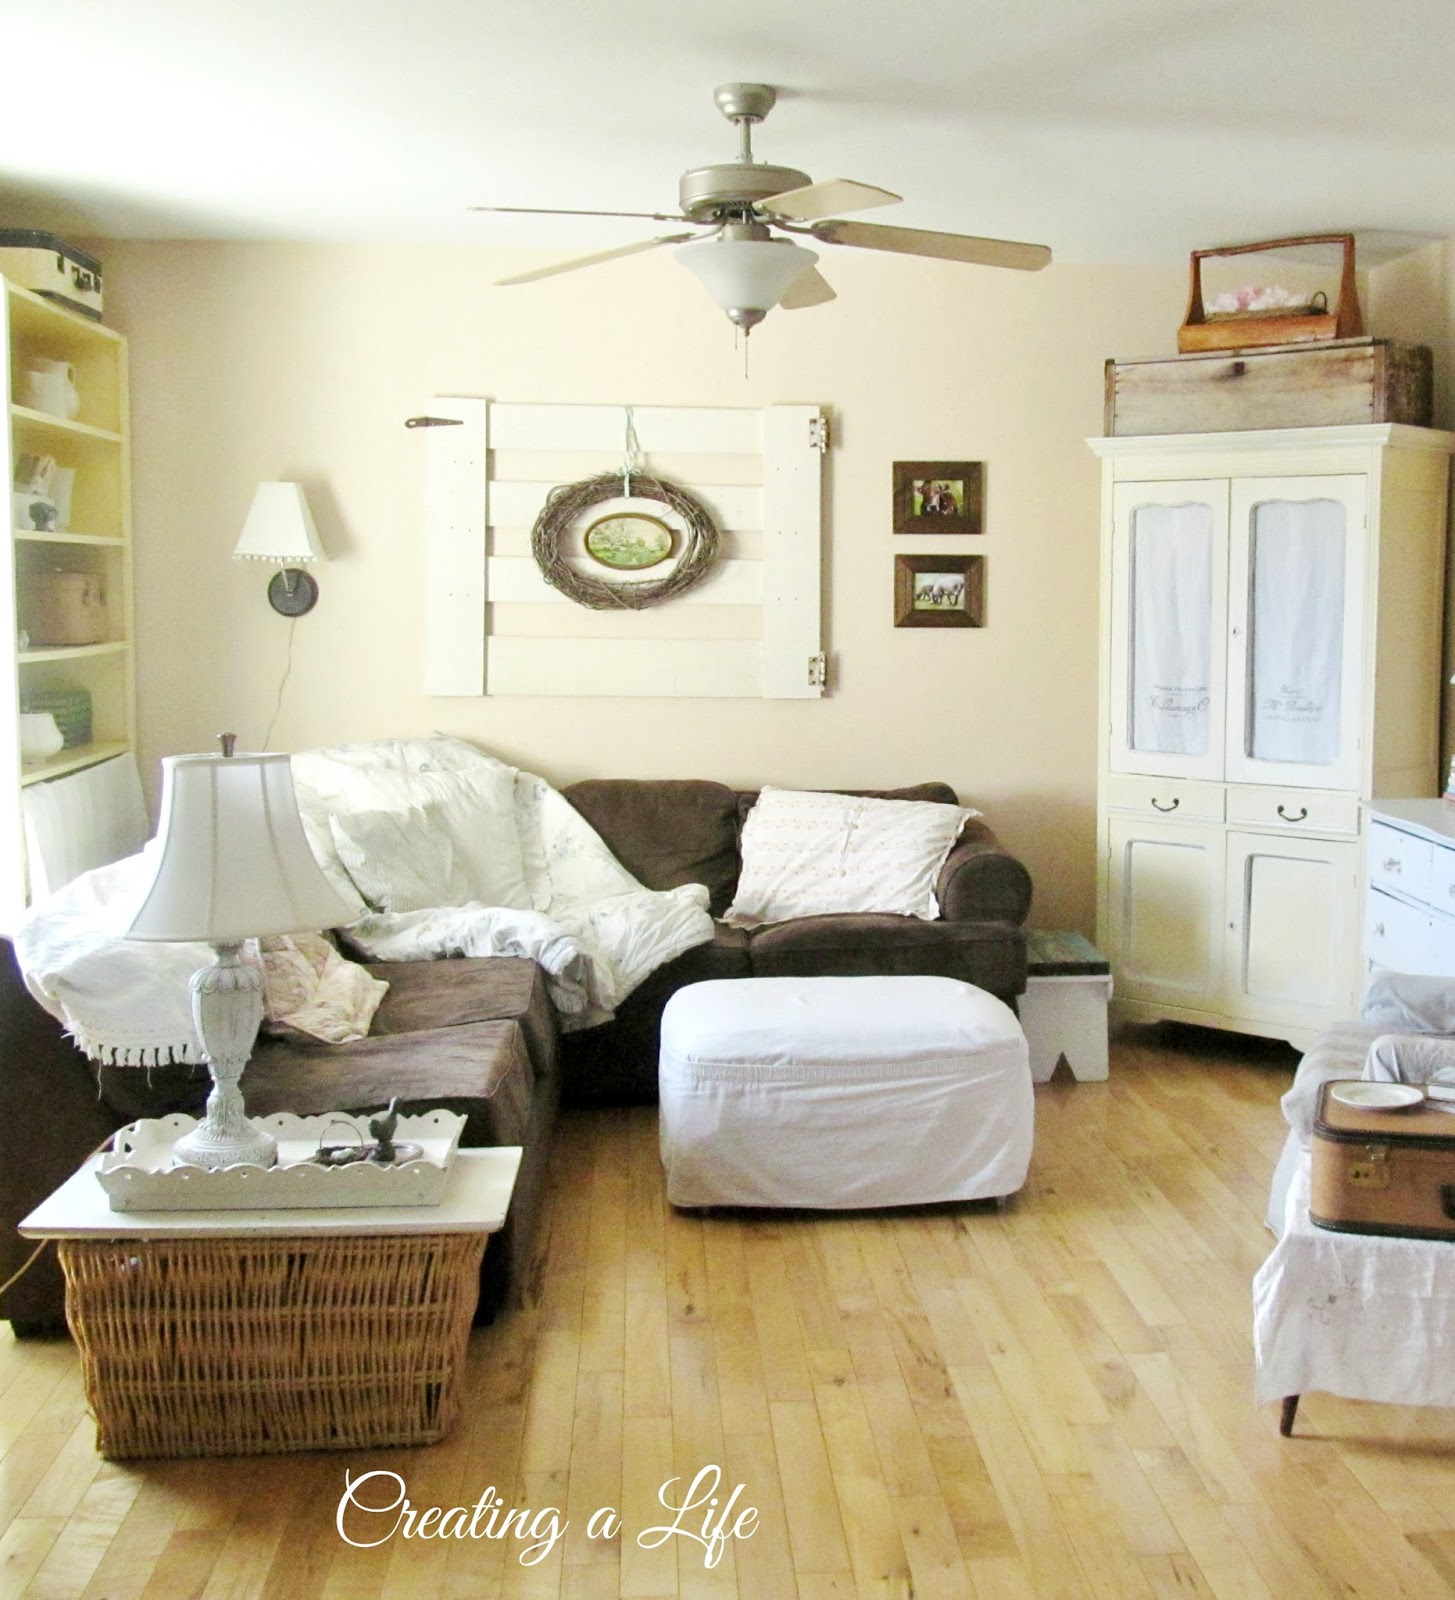 A Stroll Thru Life: Pulling It All Together - Creating A Life ... - And here it is this week, wearing a freshened-up cottage style look for  Spring. I sure would love to replace the ceiling fan with this!